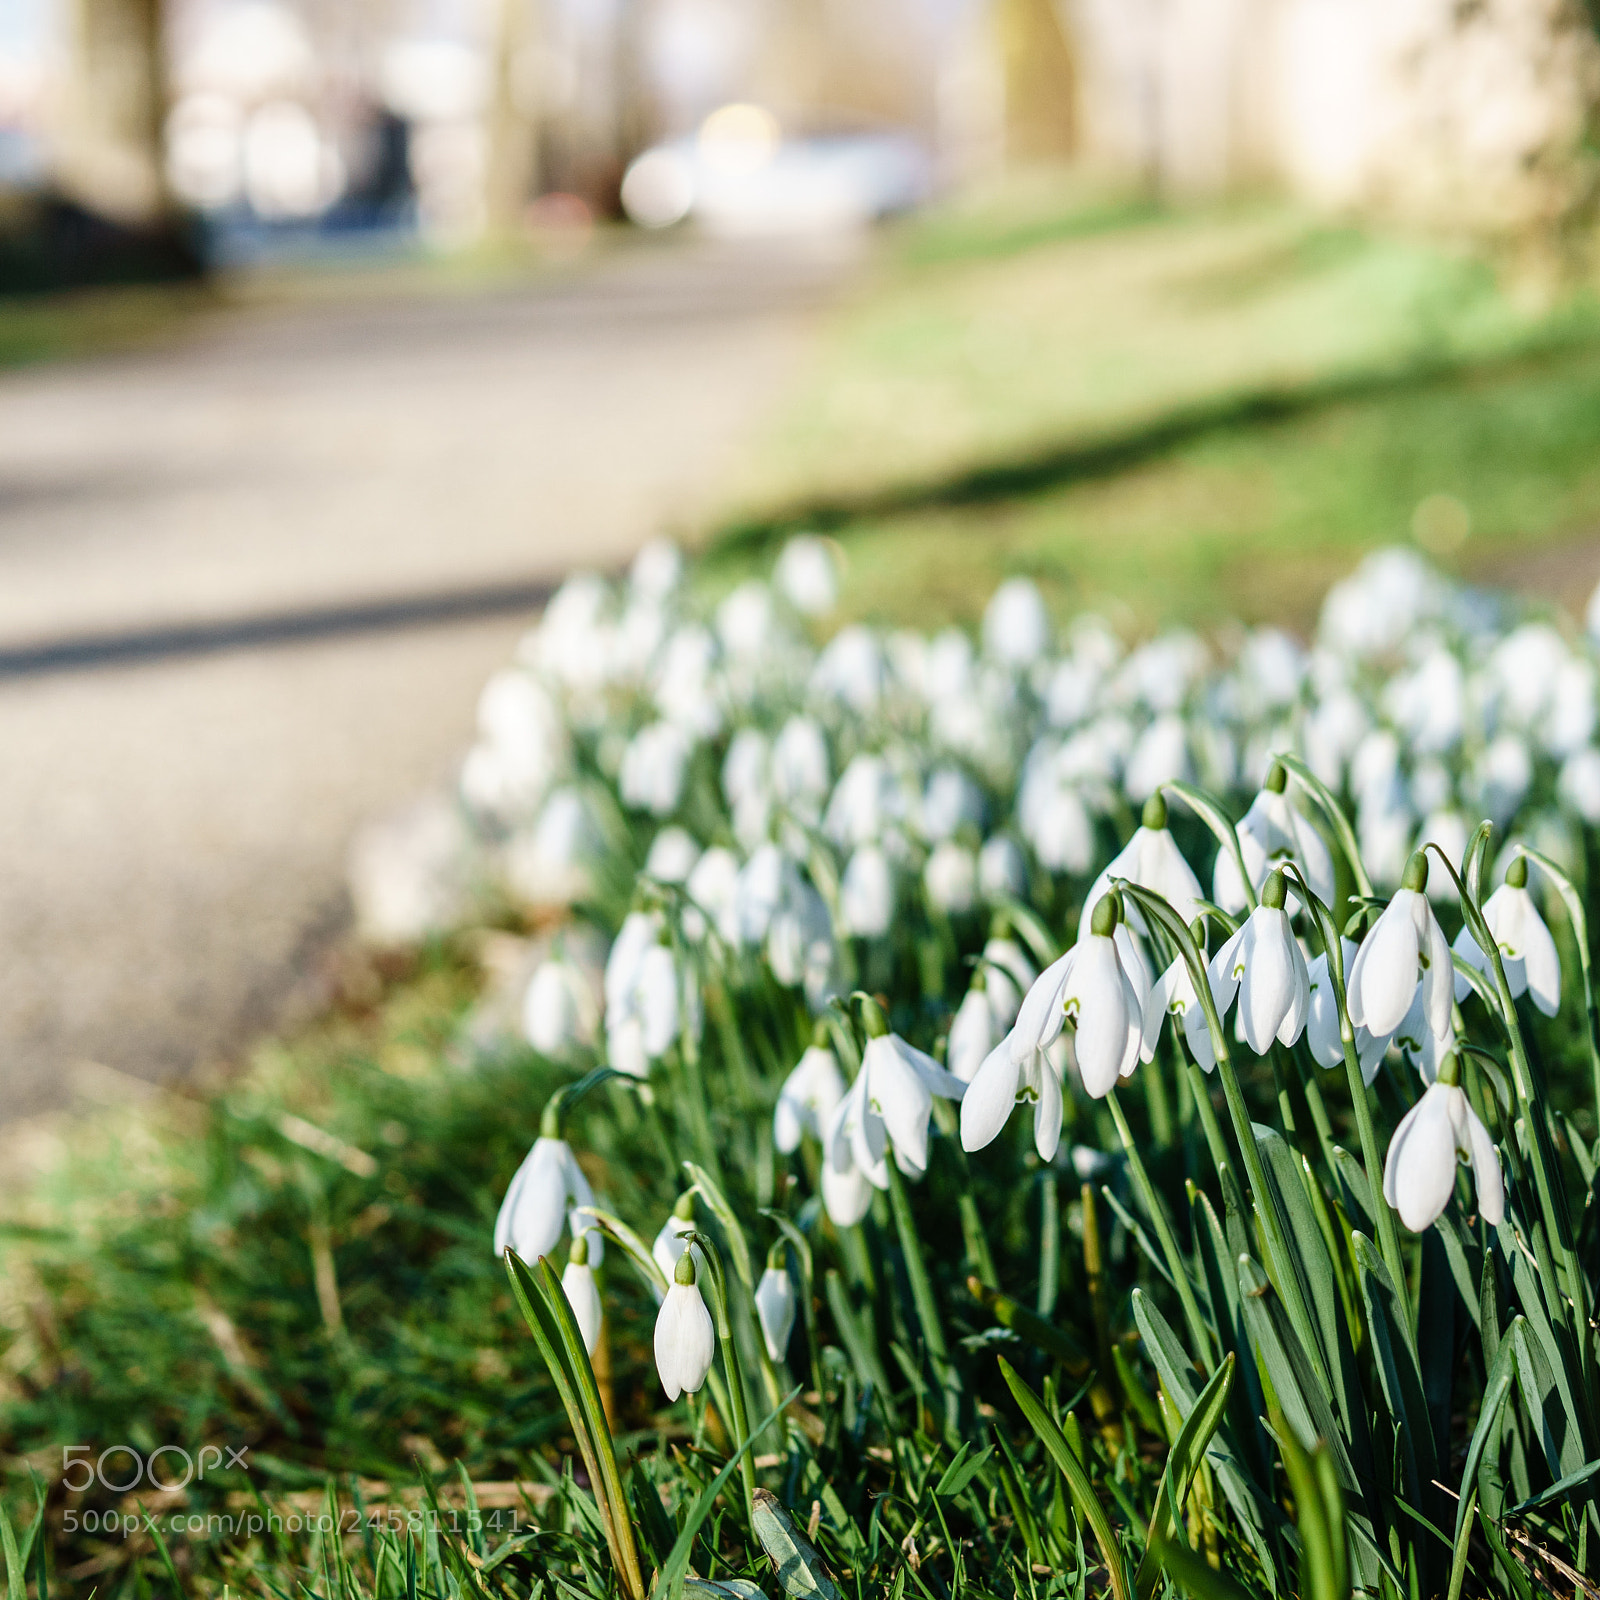 Sony a6000 sample photo. Snowdrop photography